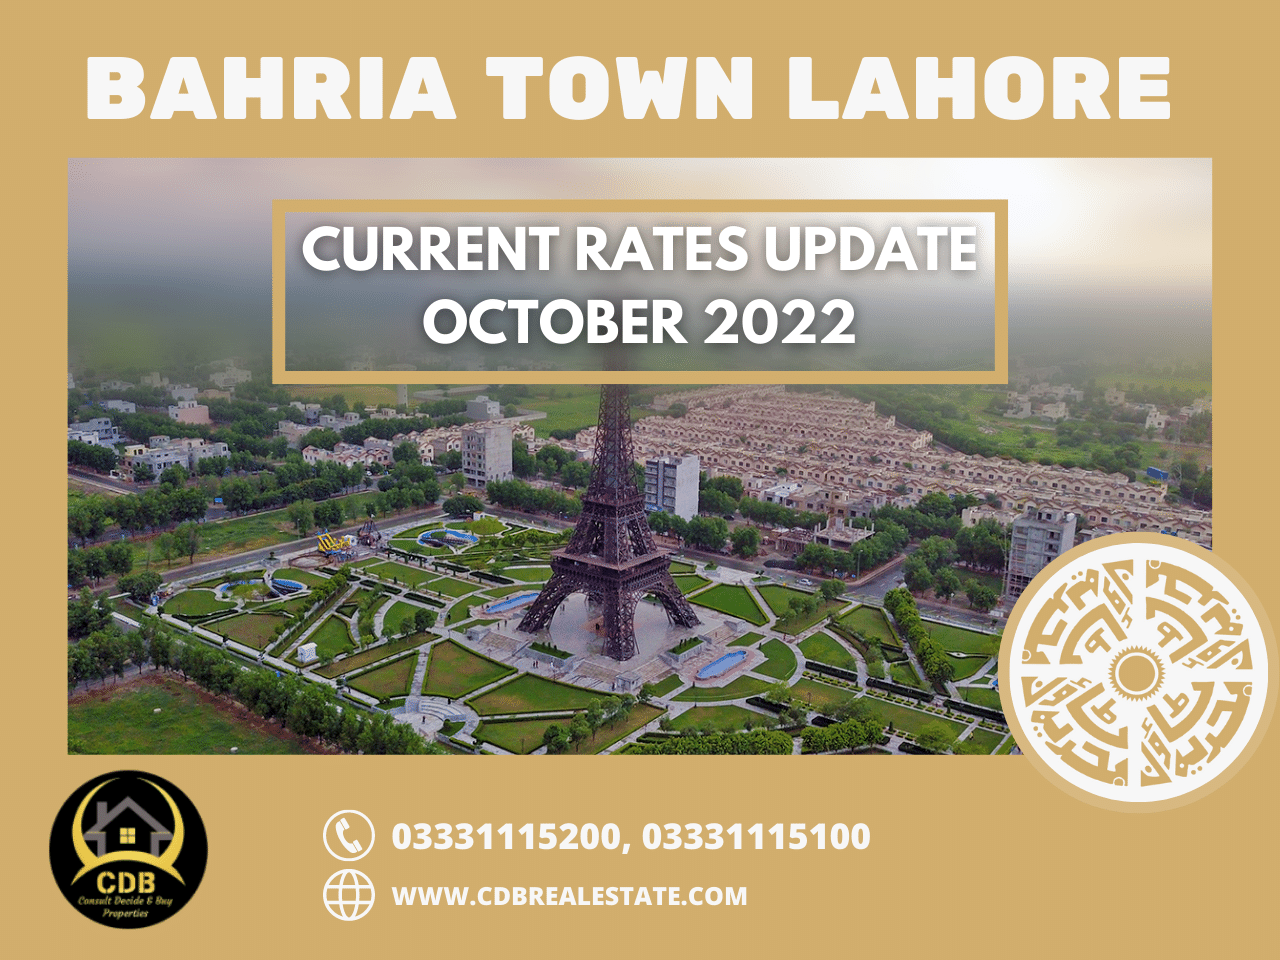 Bahria Town Lahore Current Rates Update October 2022